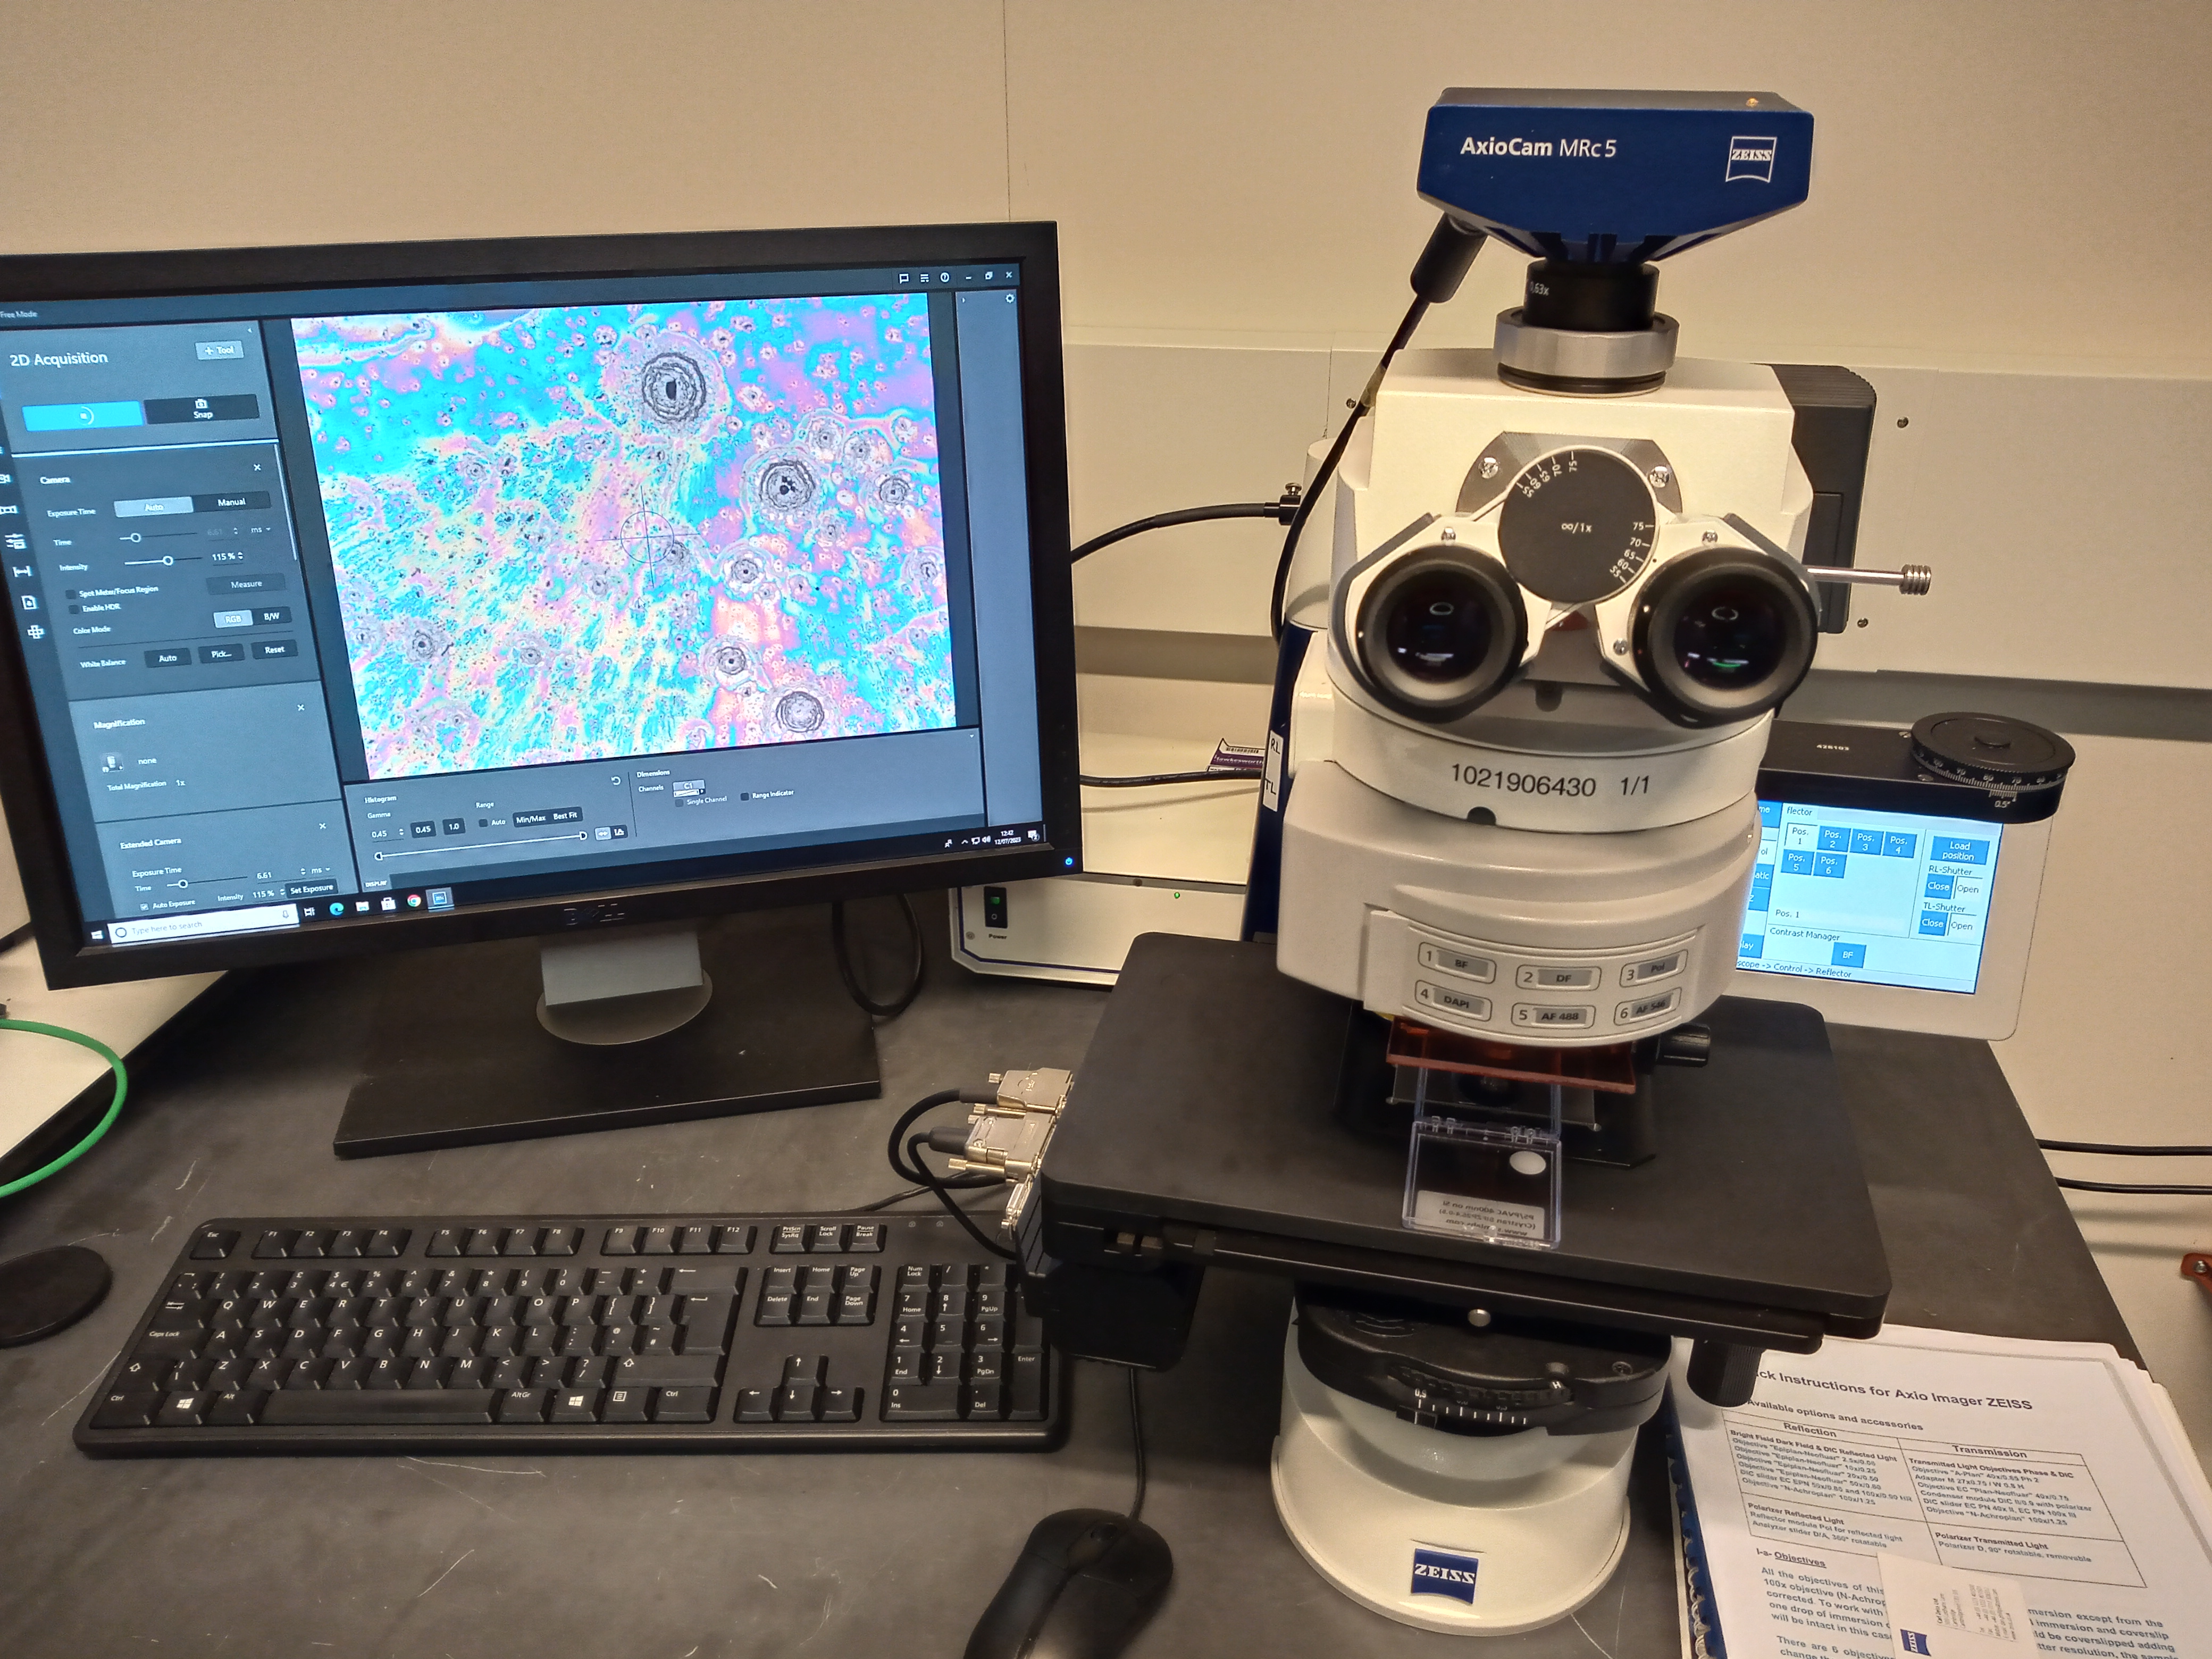 The Zeiss AxioImager Microscope at B22 